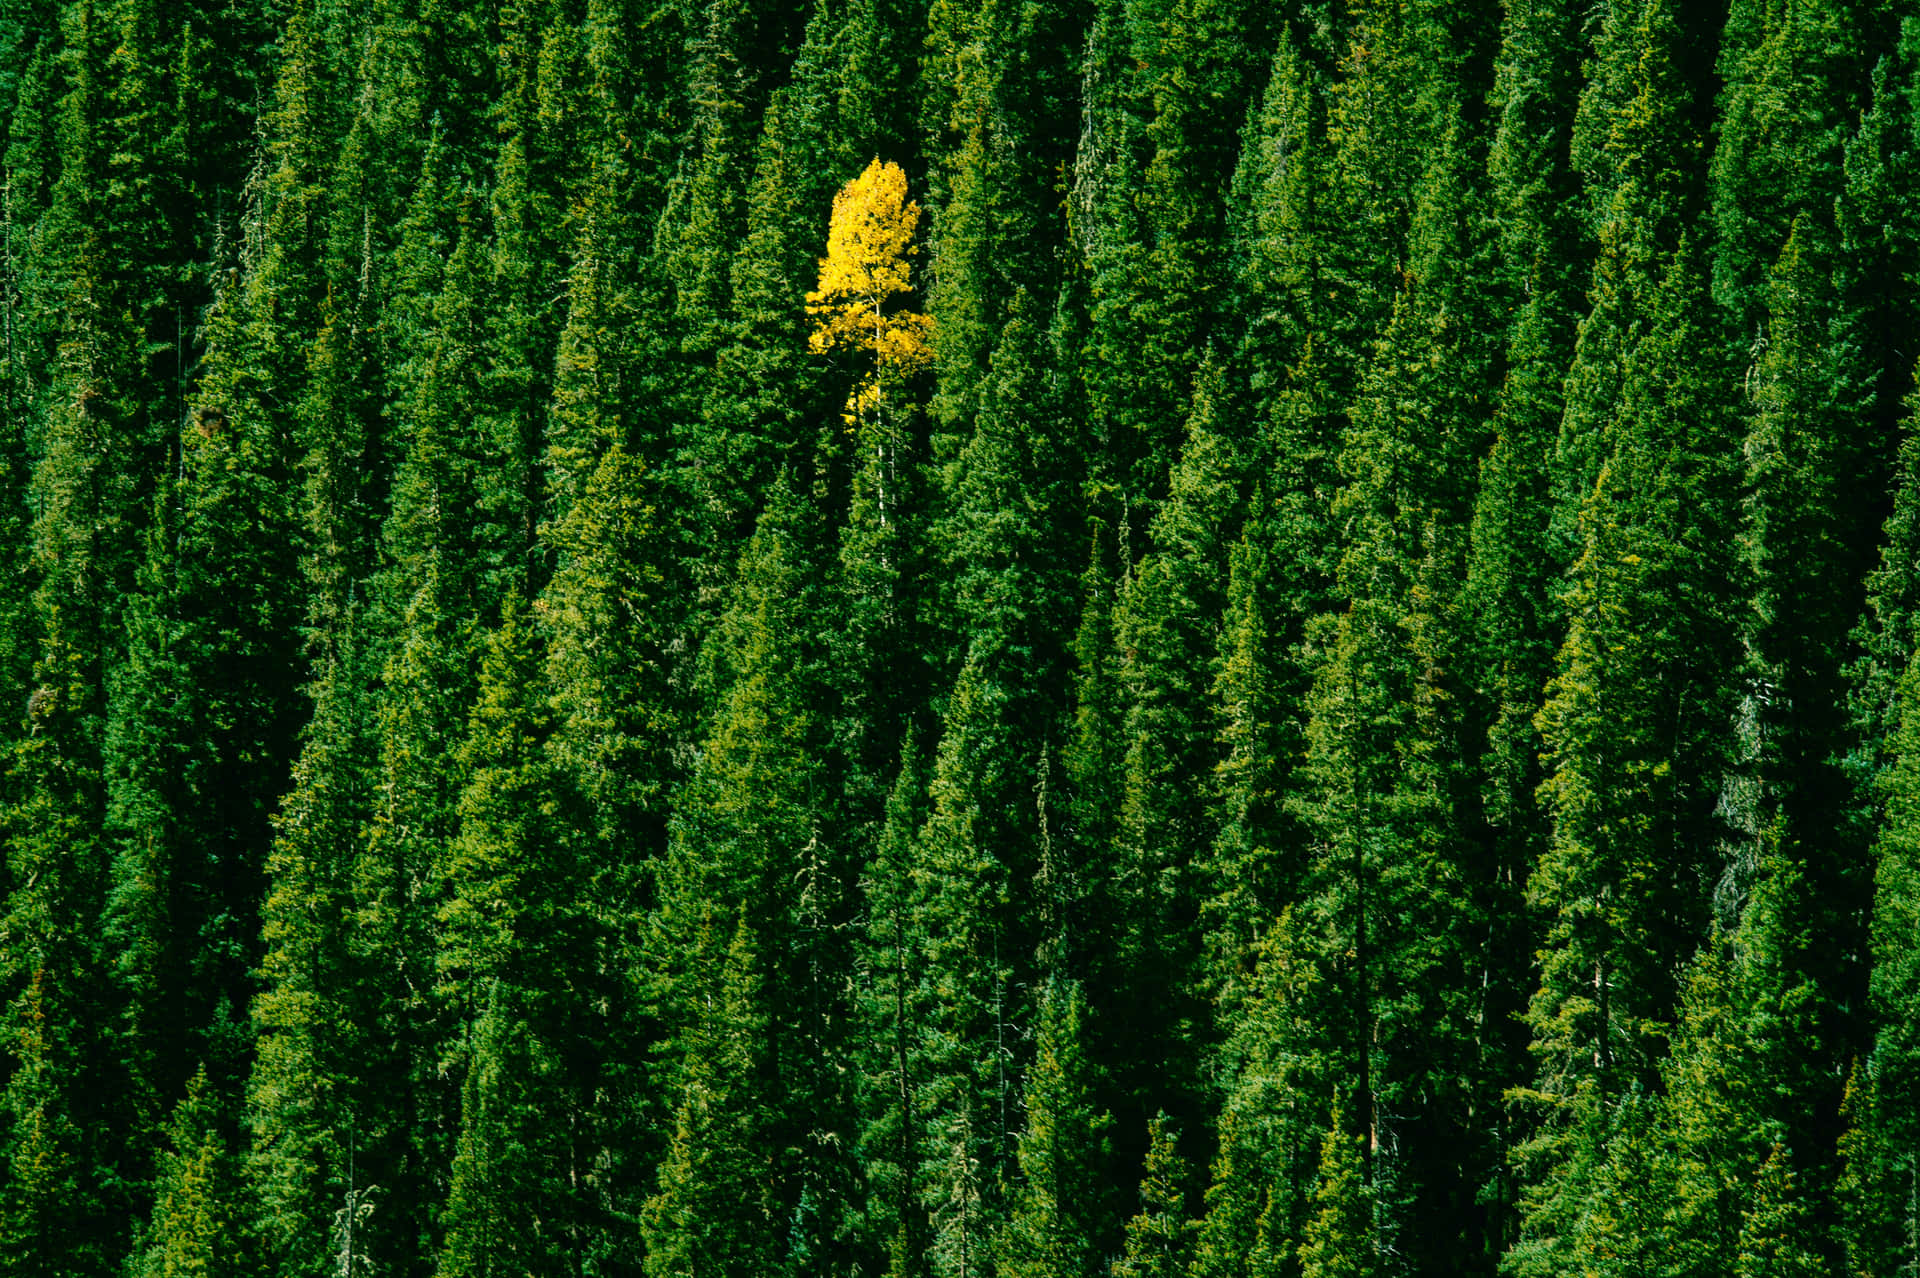 Conspicuous Yellow Tree In A Green Forest Wallpaper